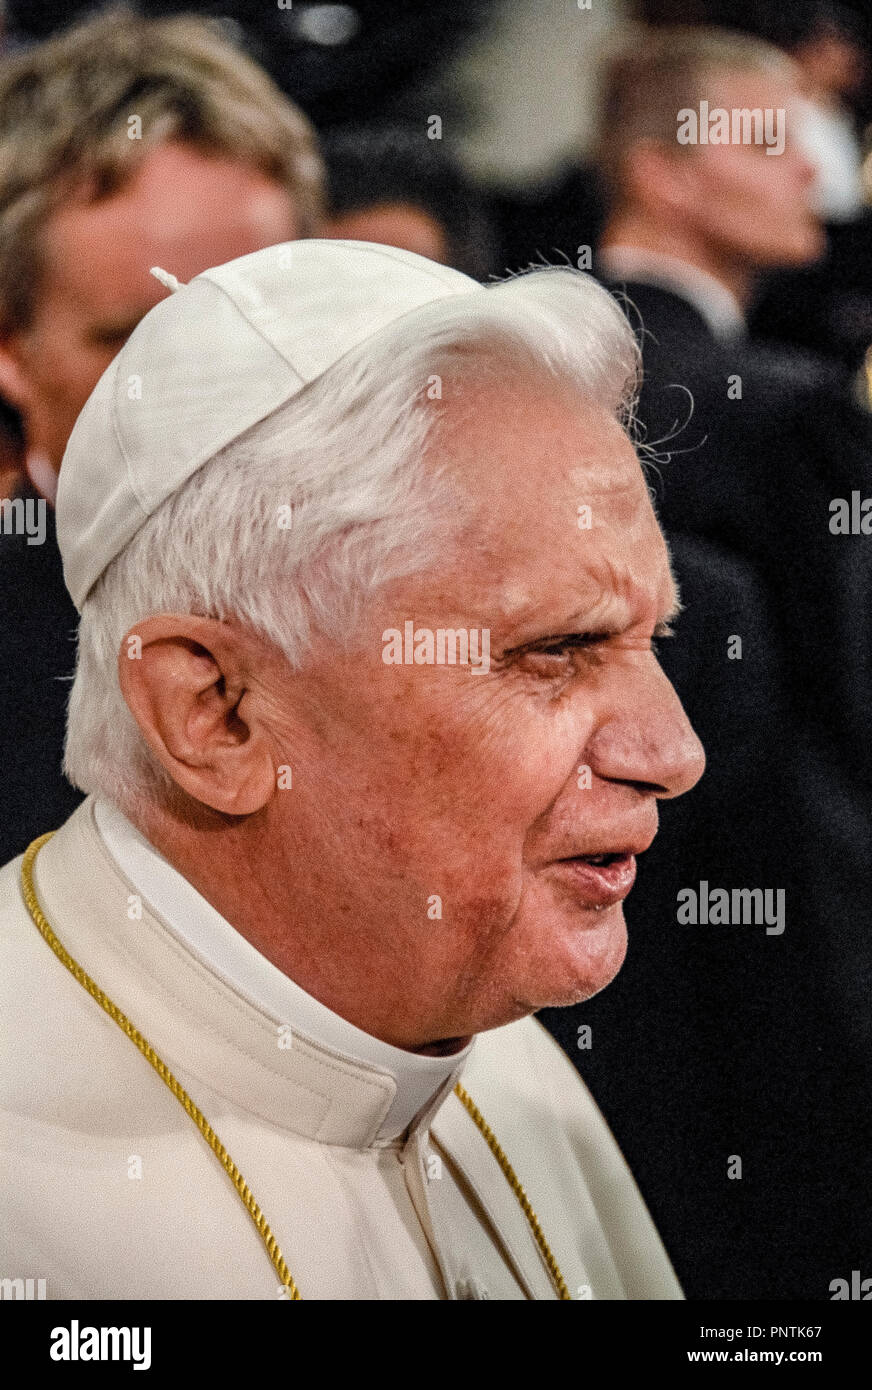 Pope Benedict XVI  - vatican Aula Paolo VI 16/04/2007 - He is 80 years old Stock Photo